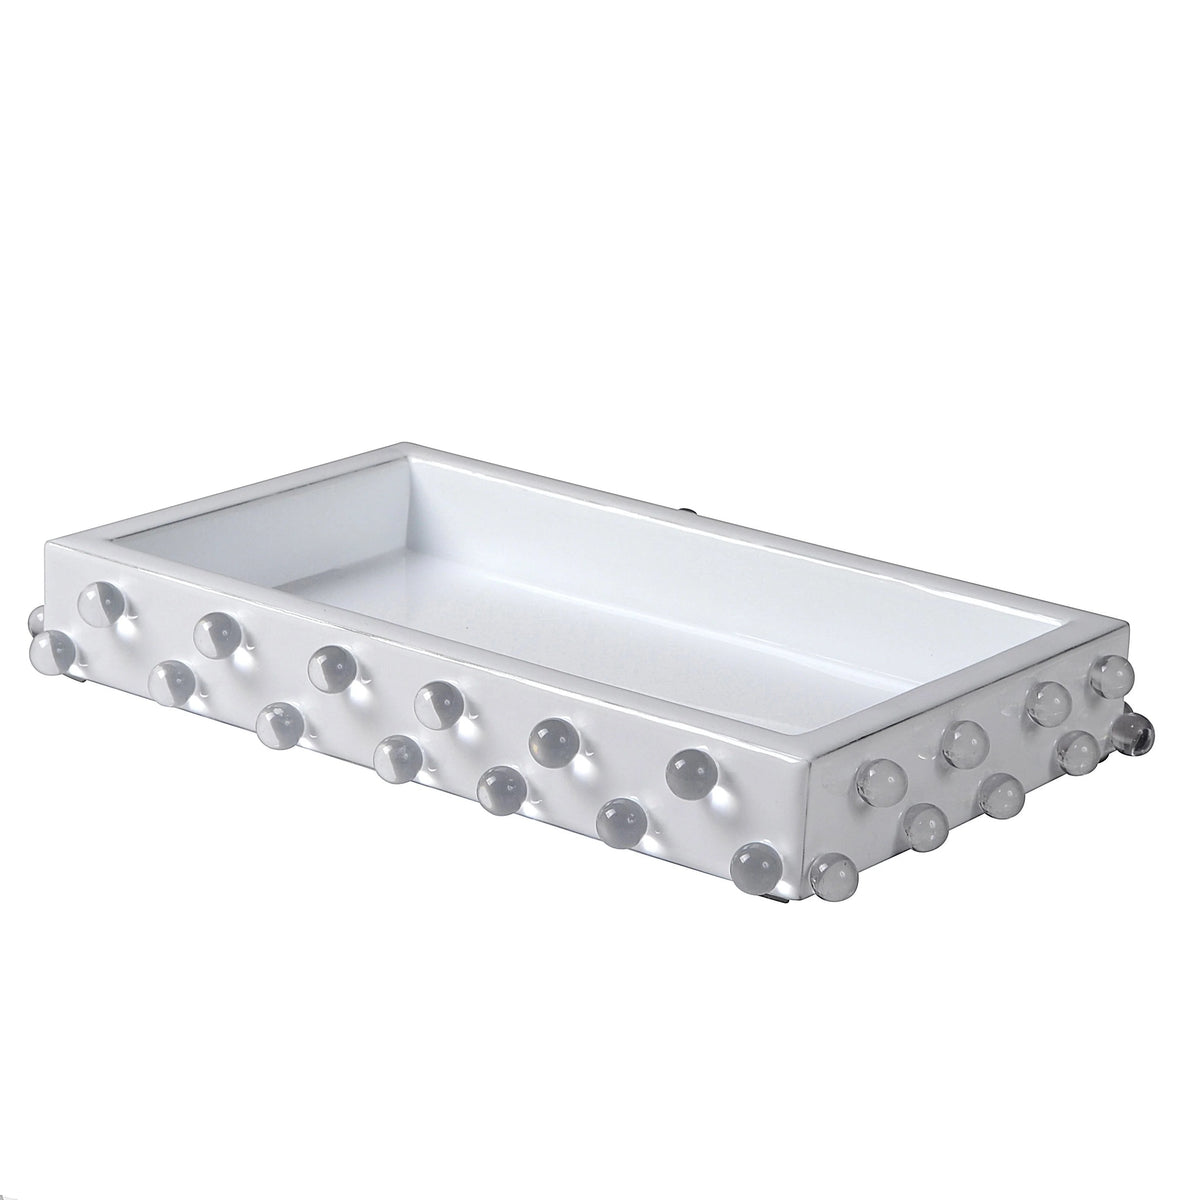 Mike and Ally Roxy Bath Accessories - Pure Tray